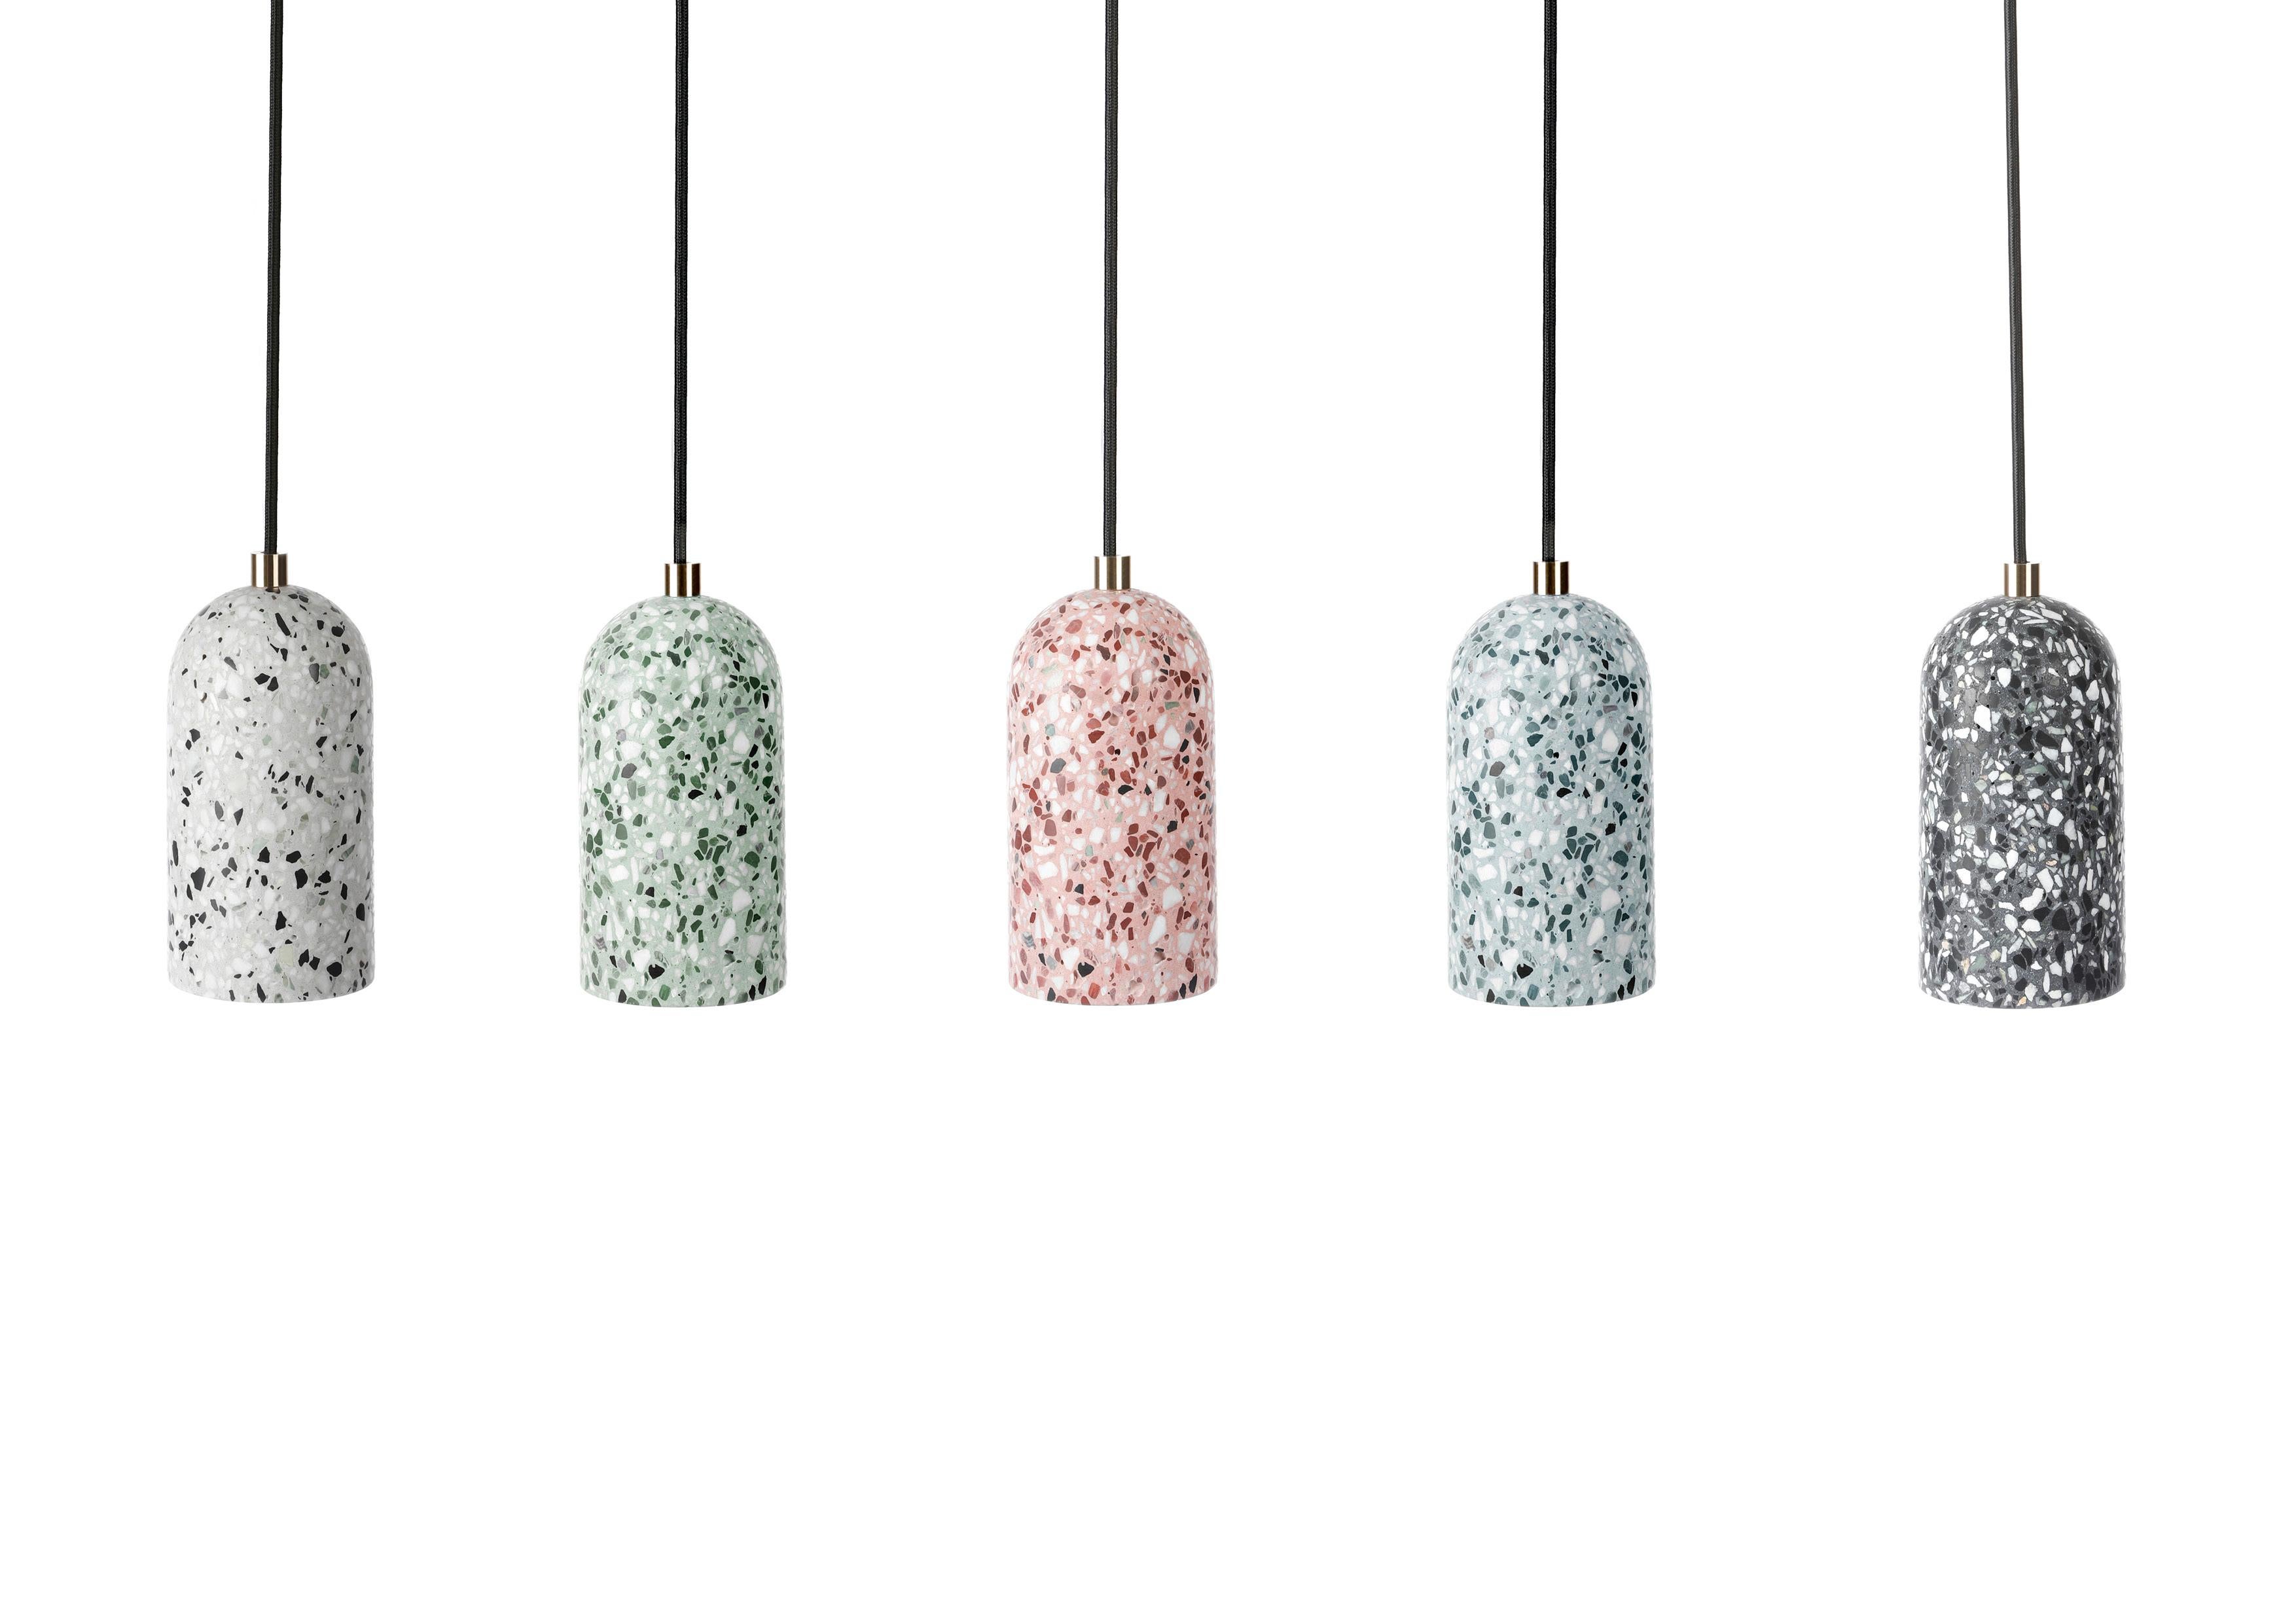 'U' Terrazzo pendant lamp designed by Cantonese studio Bentu Design

Light source: E27 LED 3W 100-240V 80Ra 200LM 3000K
Measures: H18.5 cm x D9.6 cm.

These pendant lamps are available in different colors of terrazzo: white, black, red, sky blue,